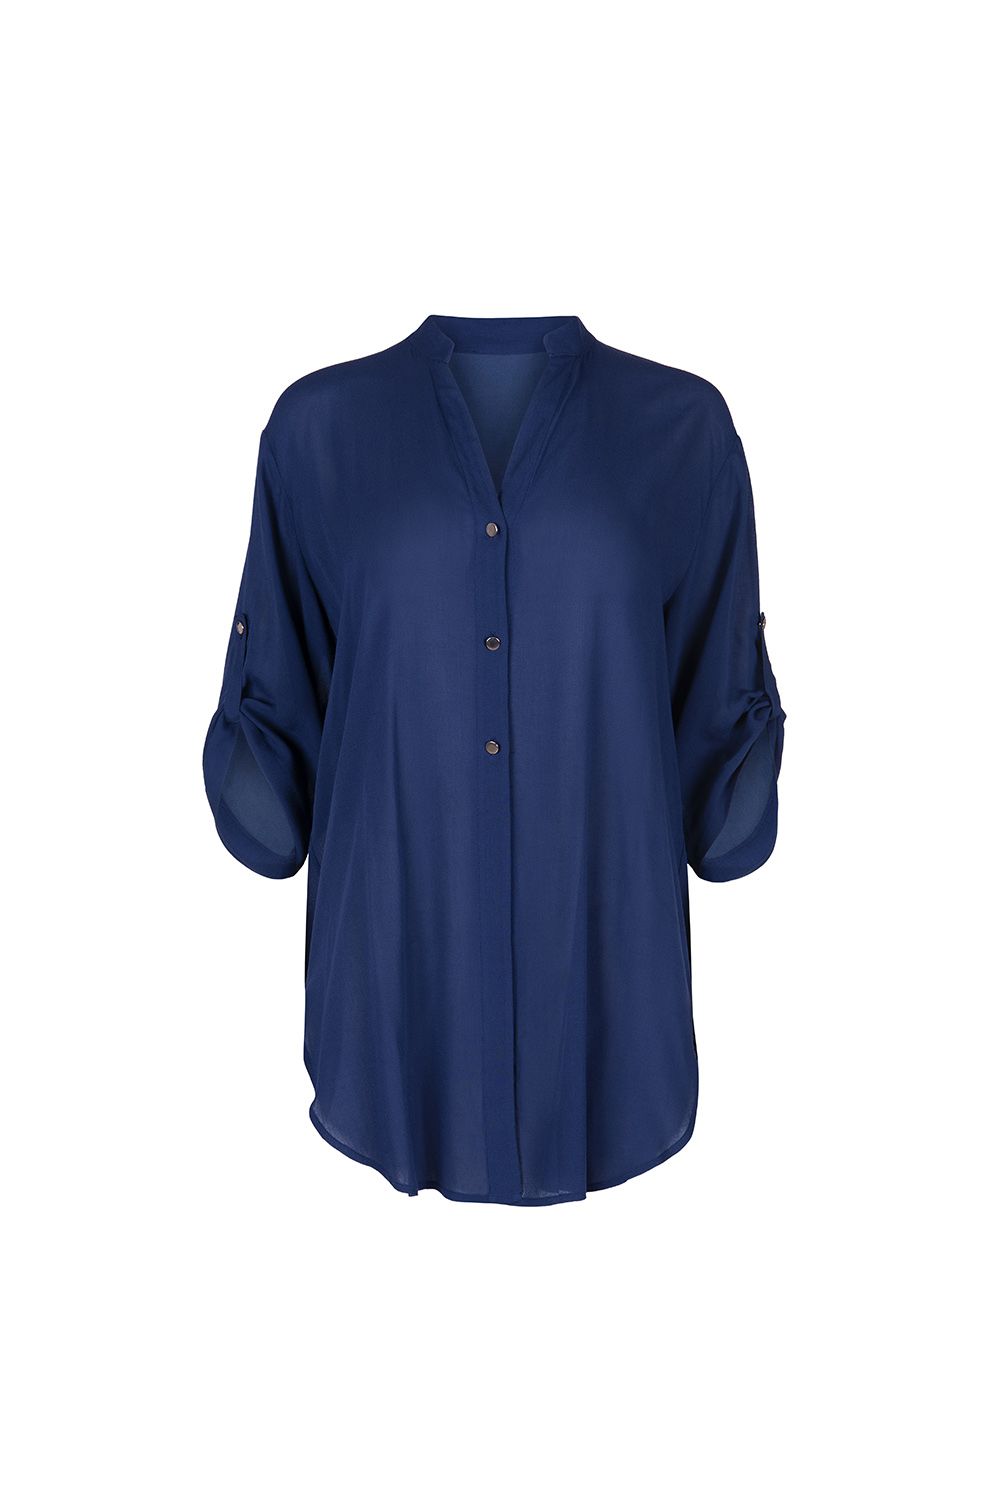 This ¾ length sleeve blouse from the Lisca ‘Panama’ range is modern and comfortable. Features front buttoning, slits in the side seams and is loose-fitting for optimum comfort.